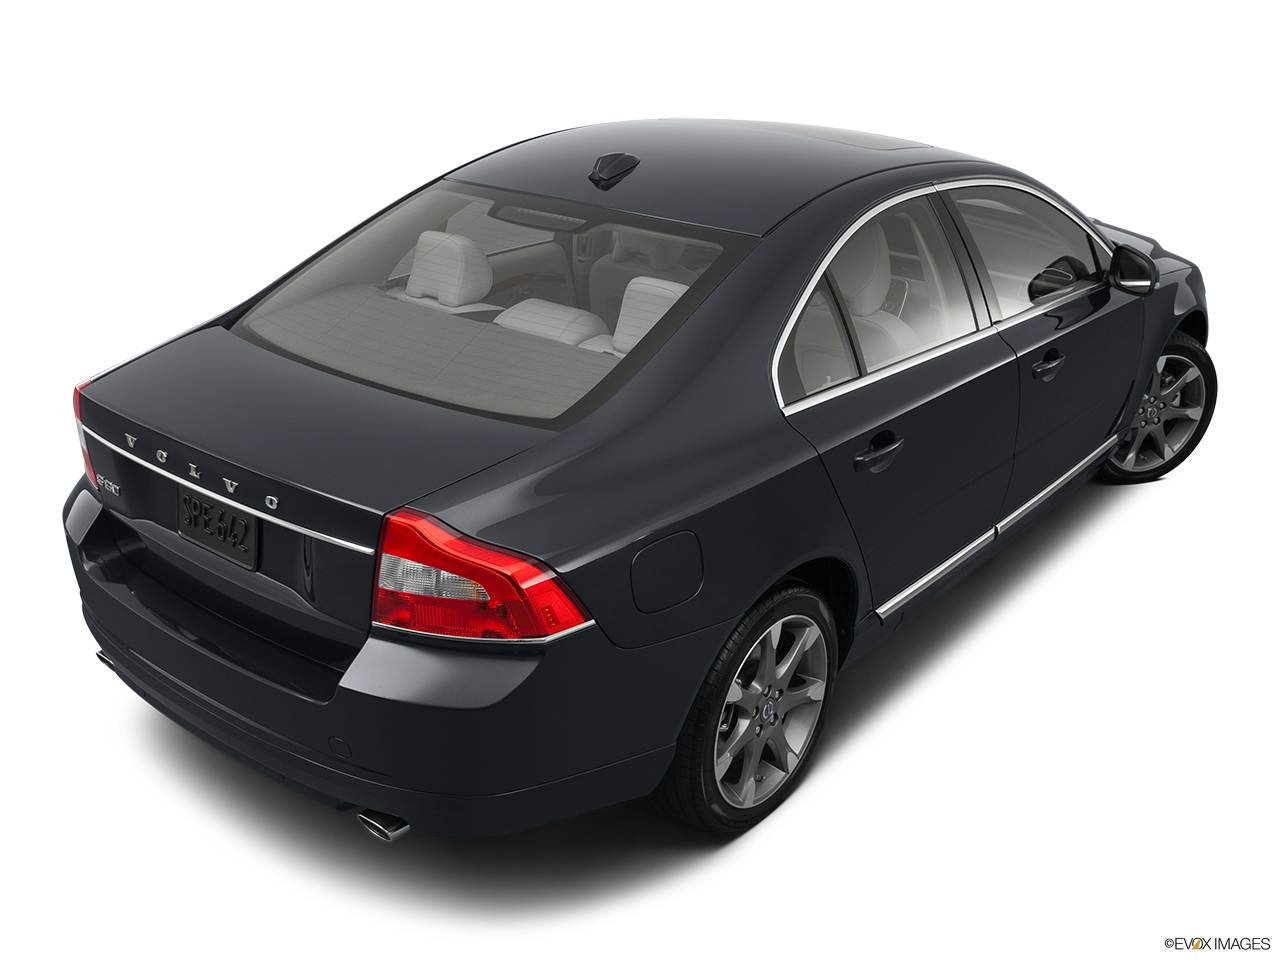 2012 Volvo S80 3.2 Rear 3/4 angle view. 